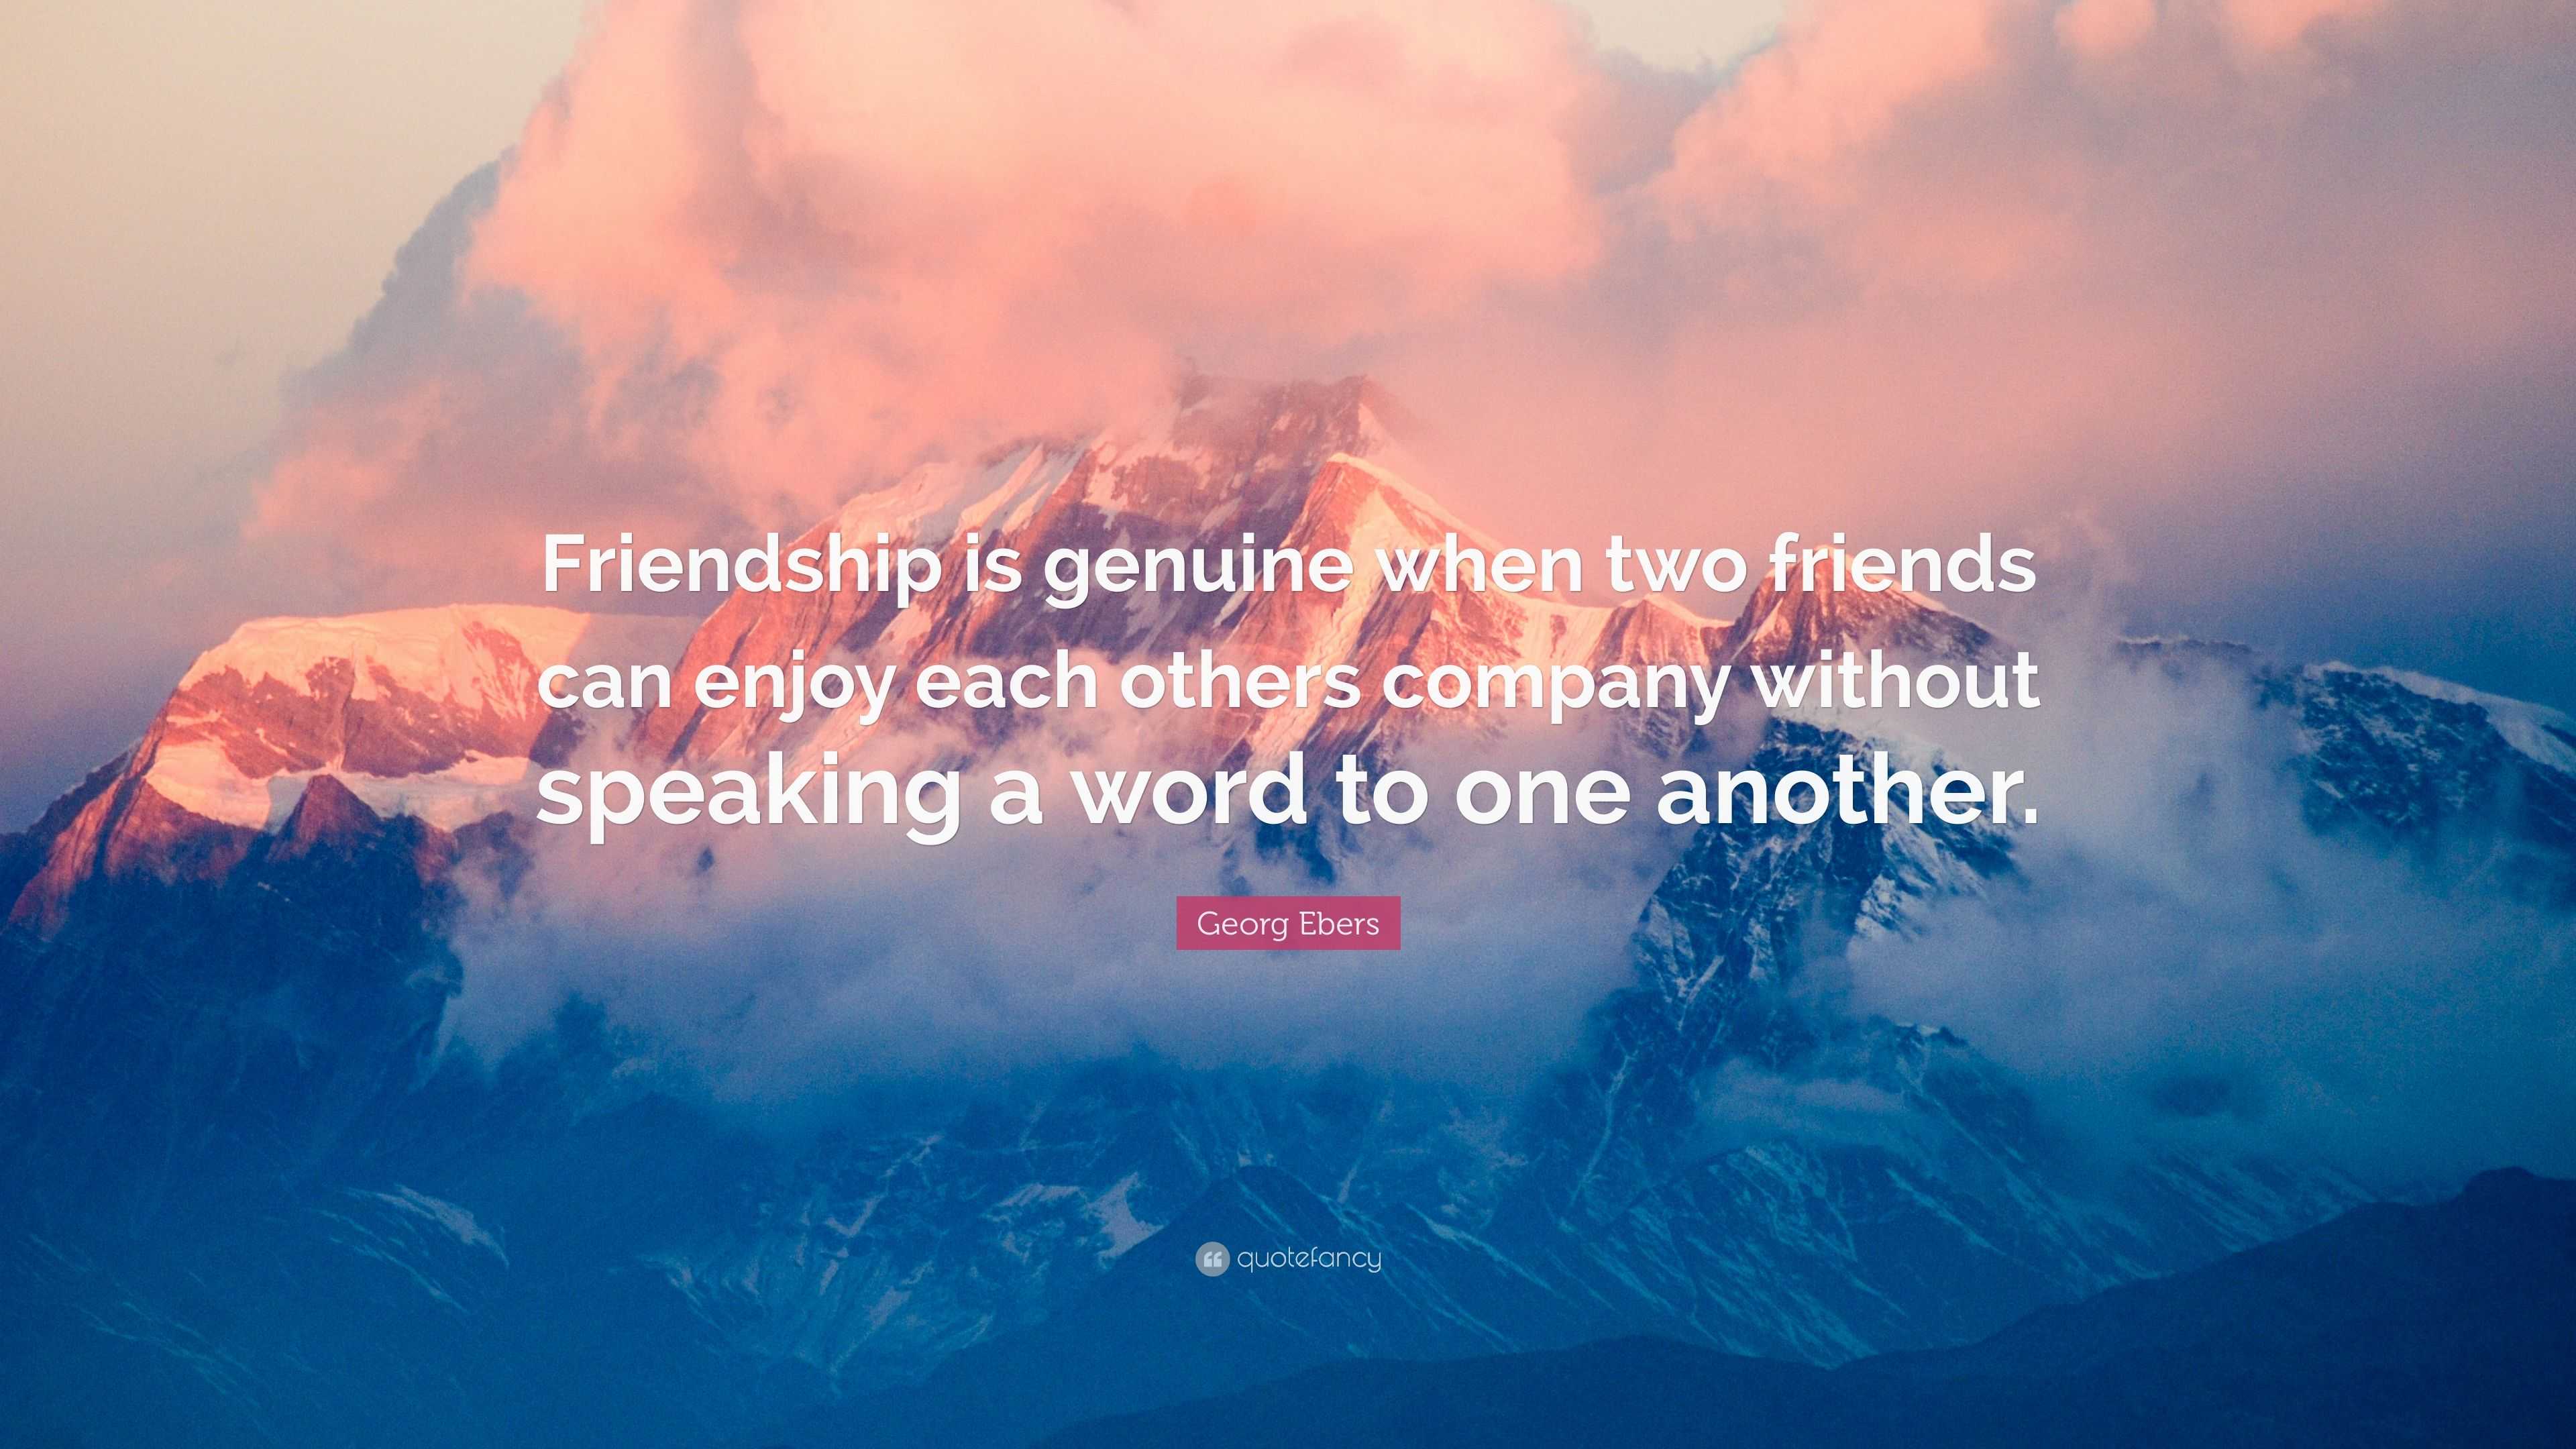 Georg Ebers Quote: “Friendship is genuine when two friends can enjoy ...